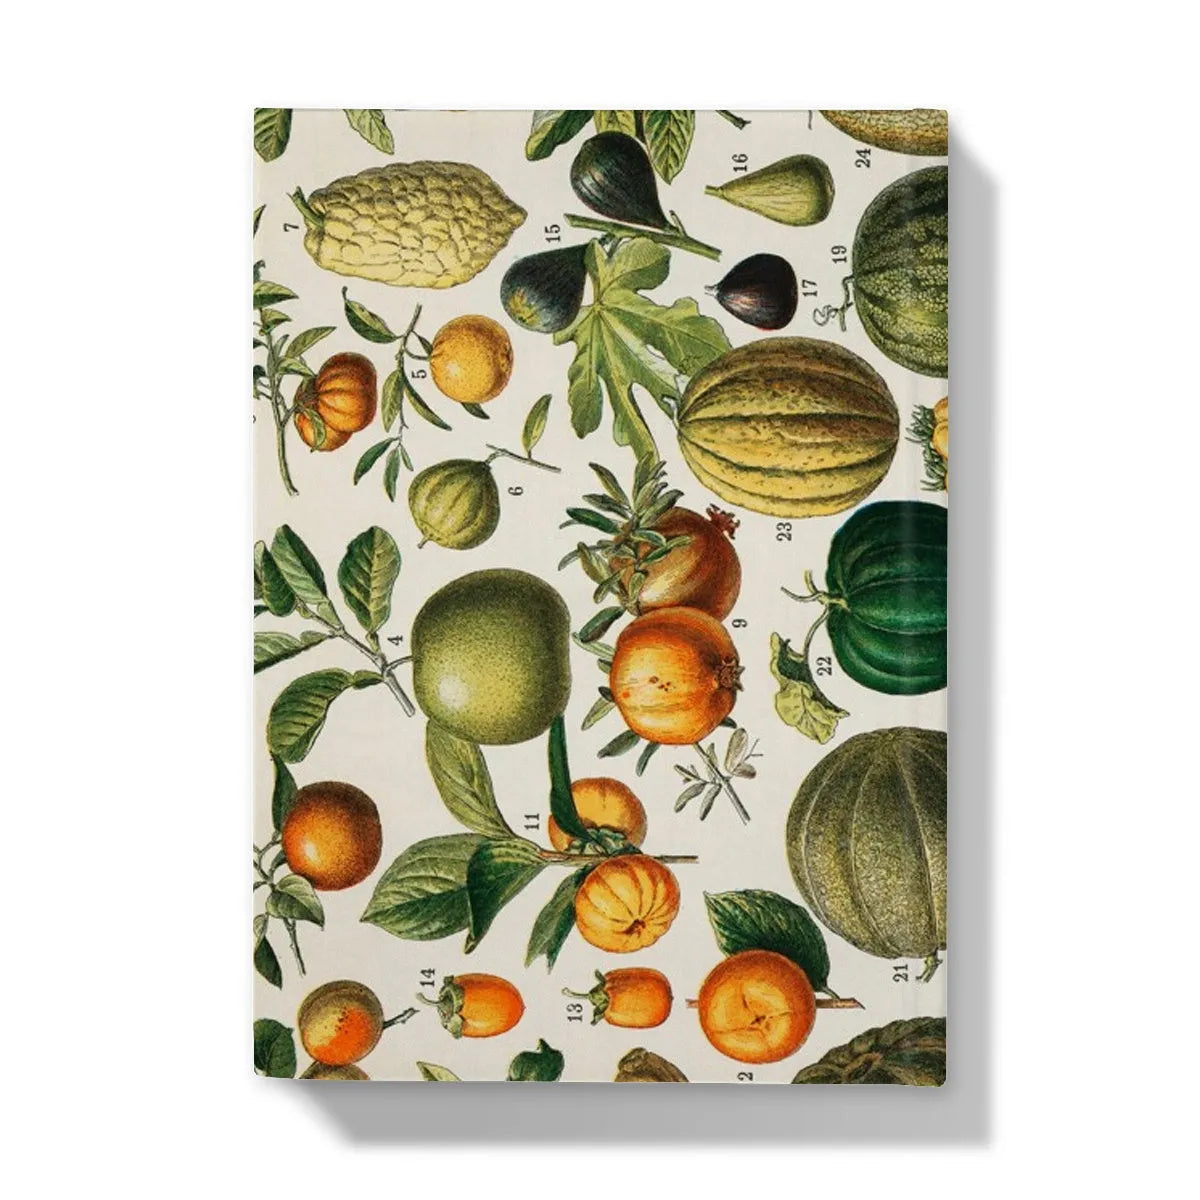 Fruits And Vegetables From Nouveau Larousse Illustre By Larousse Pierre Augé And Claude Hardback Journal - Notebooks